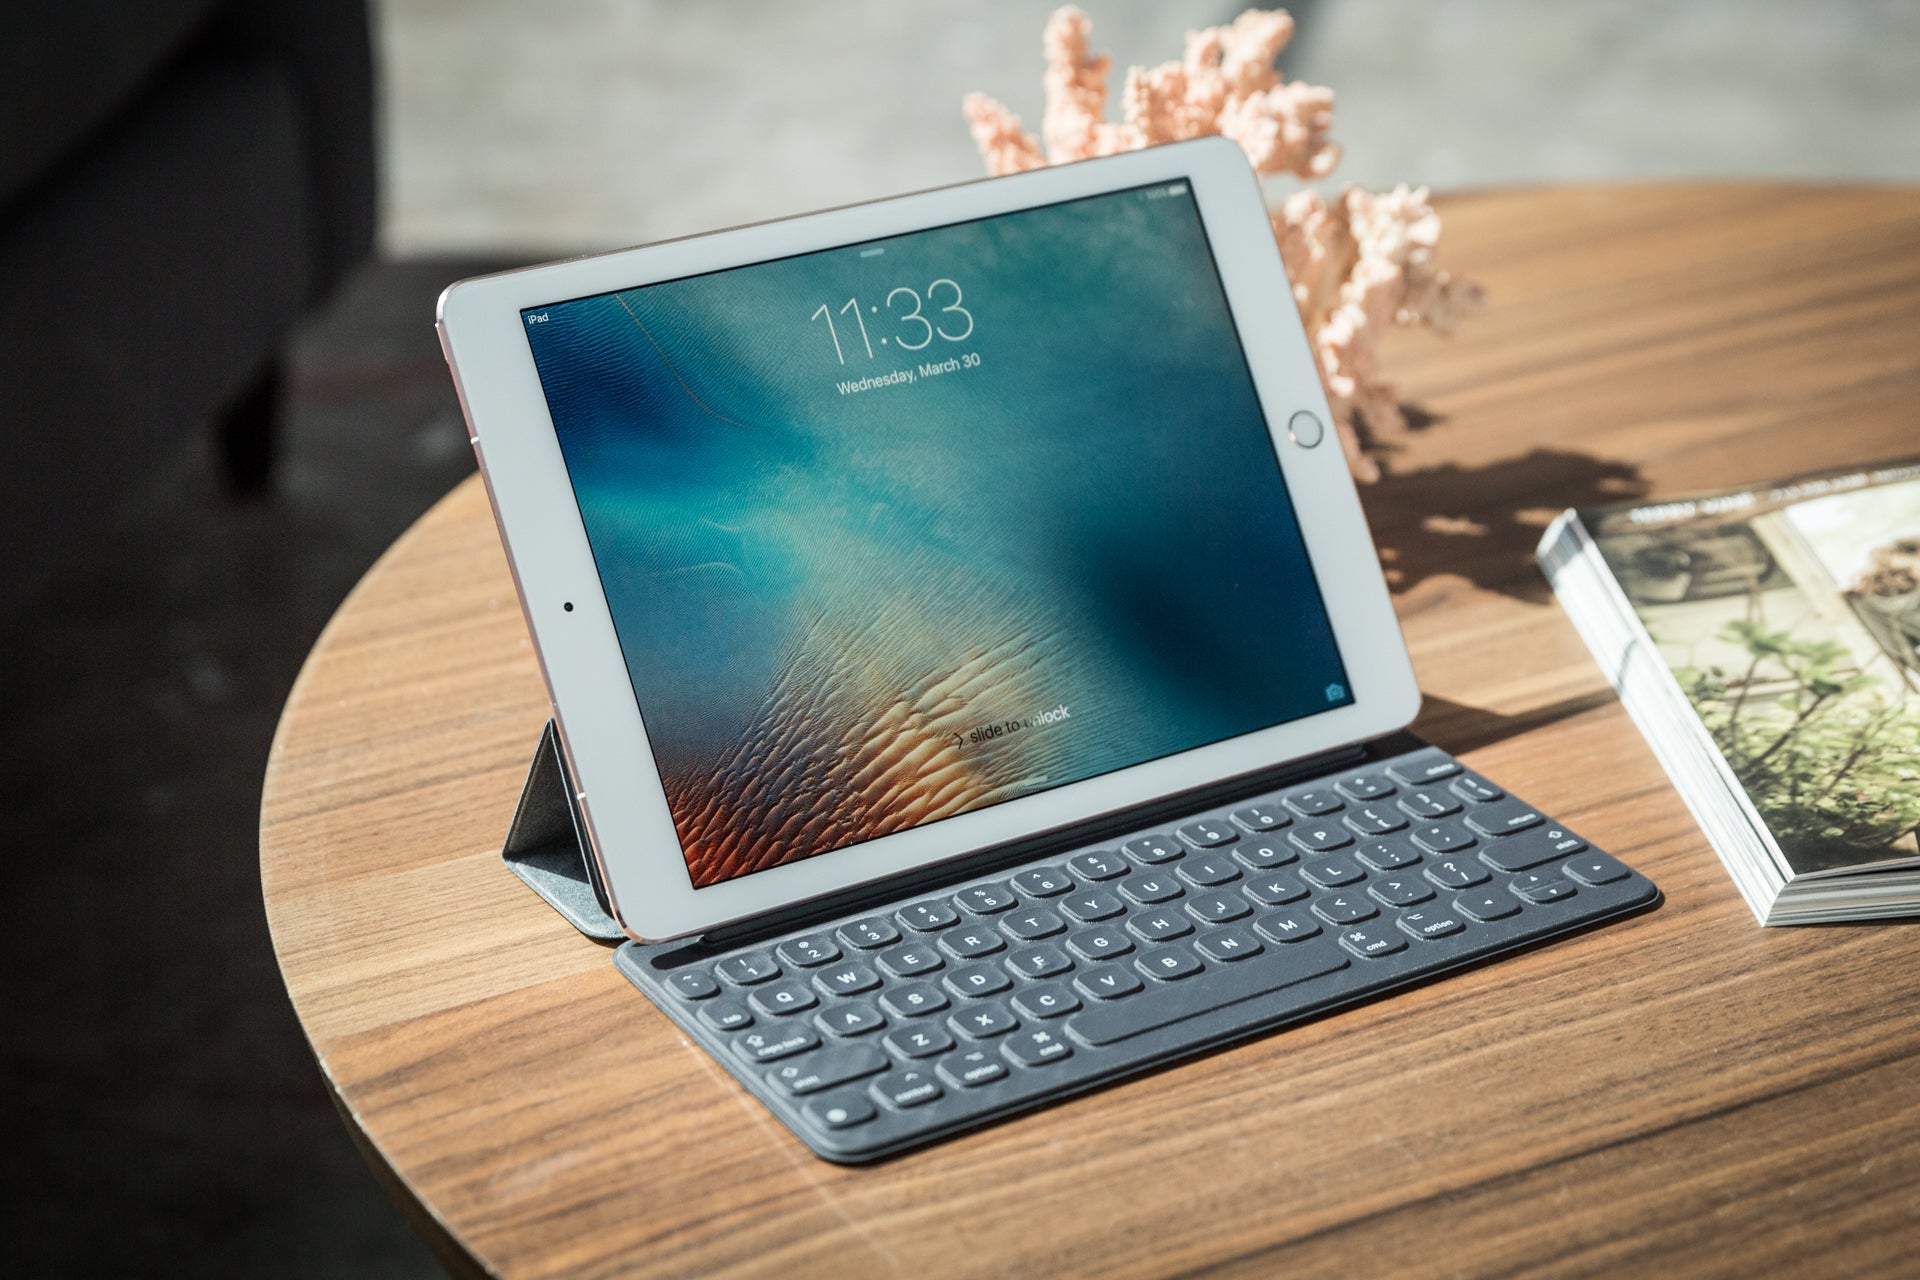 iPad Pro or MacBook? The best Apple gear for college | Macworld